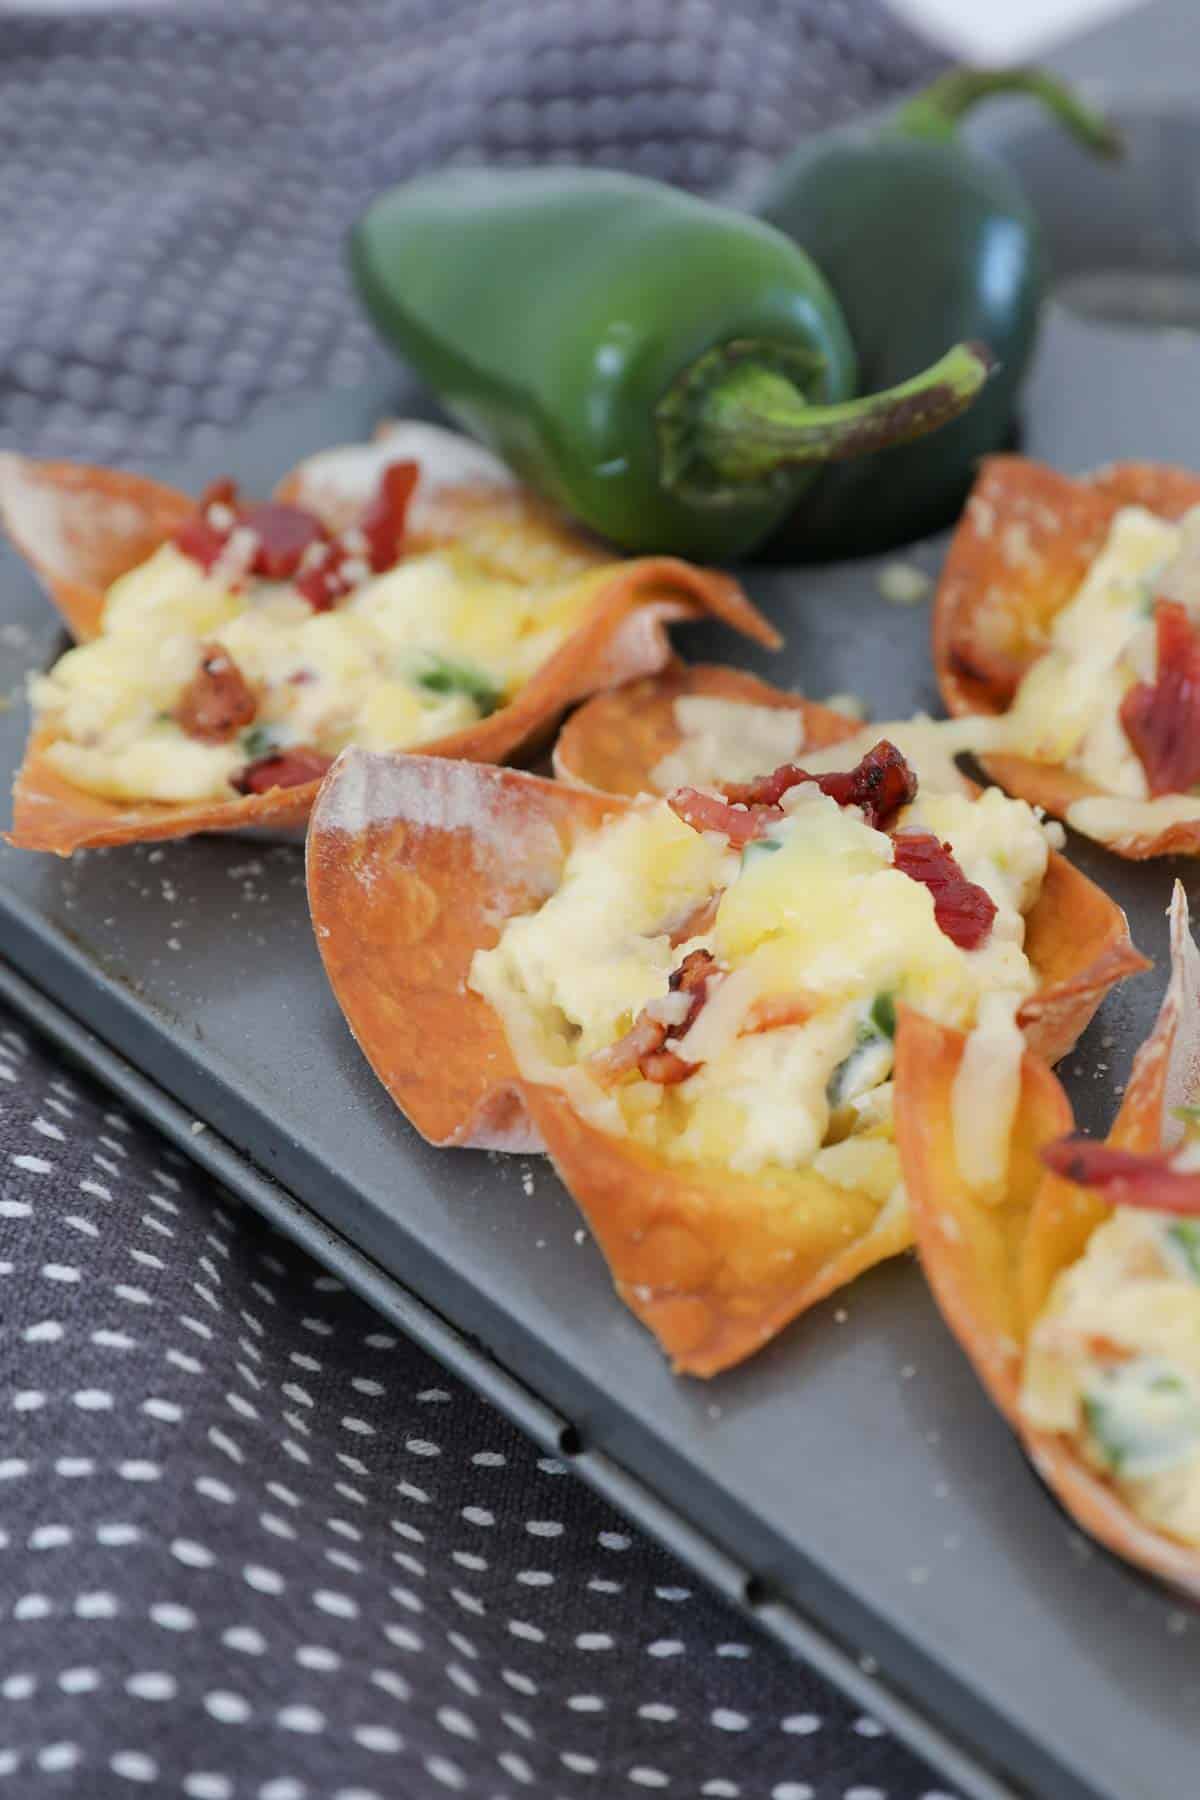 Crispy wonton cups with a spicy filling.